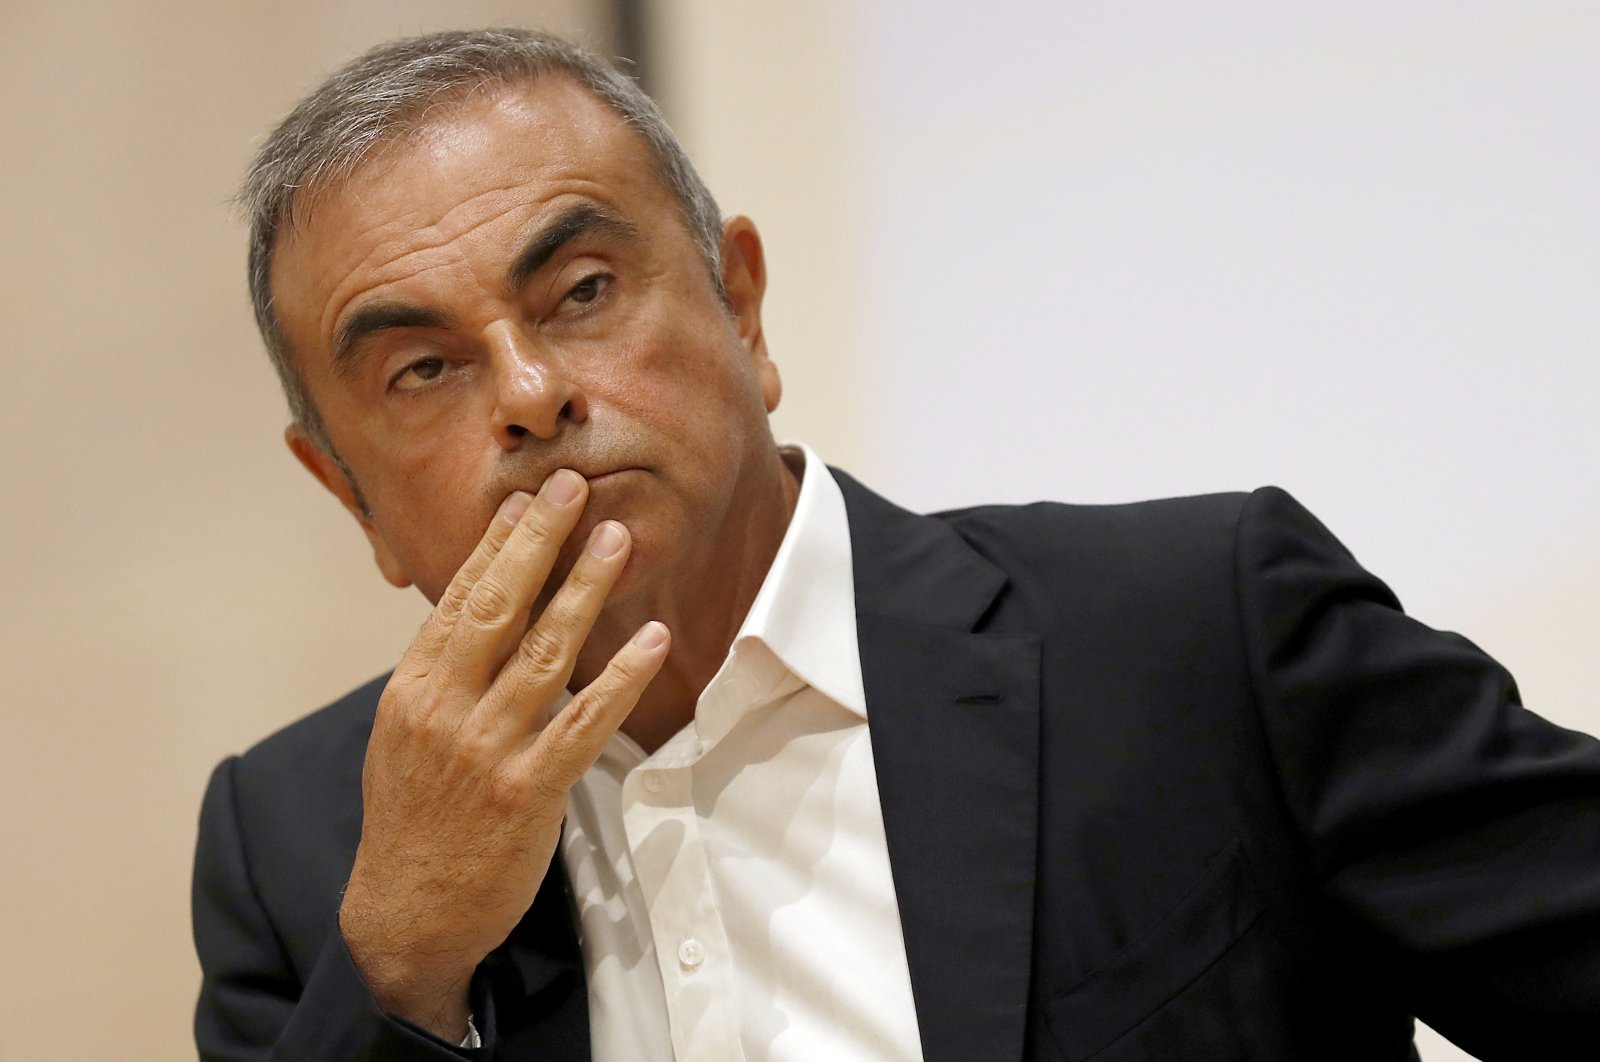 Former Nissan Motor Co. Chairman Carlos Ghosn holds a press conference at the Maronite Christian Holy Spirit University of Kaslik, north of Beirut, Lebanon, Sept. 29, 2020. (AP Photo)